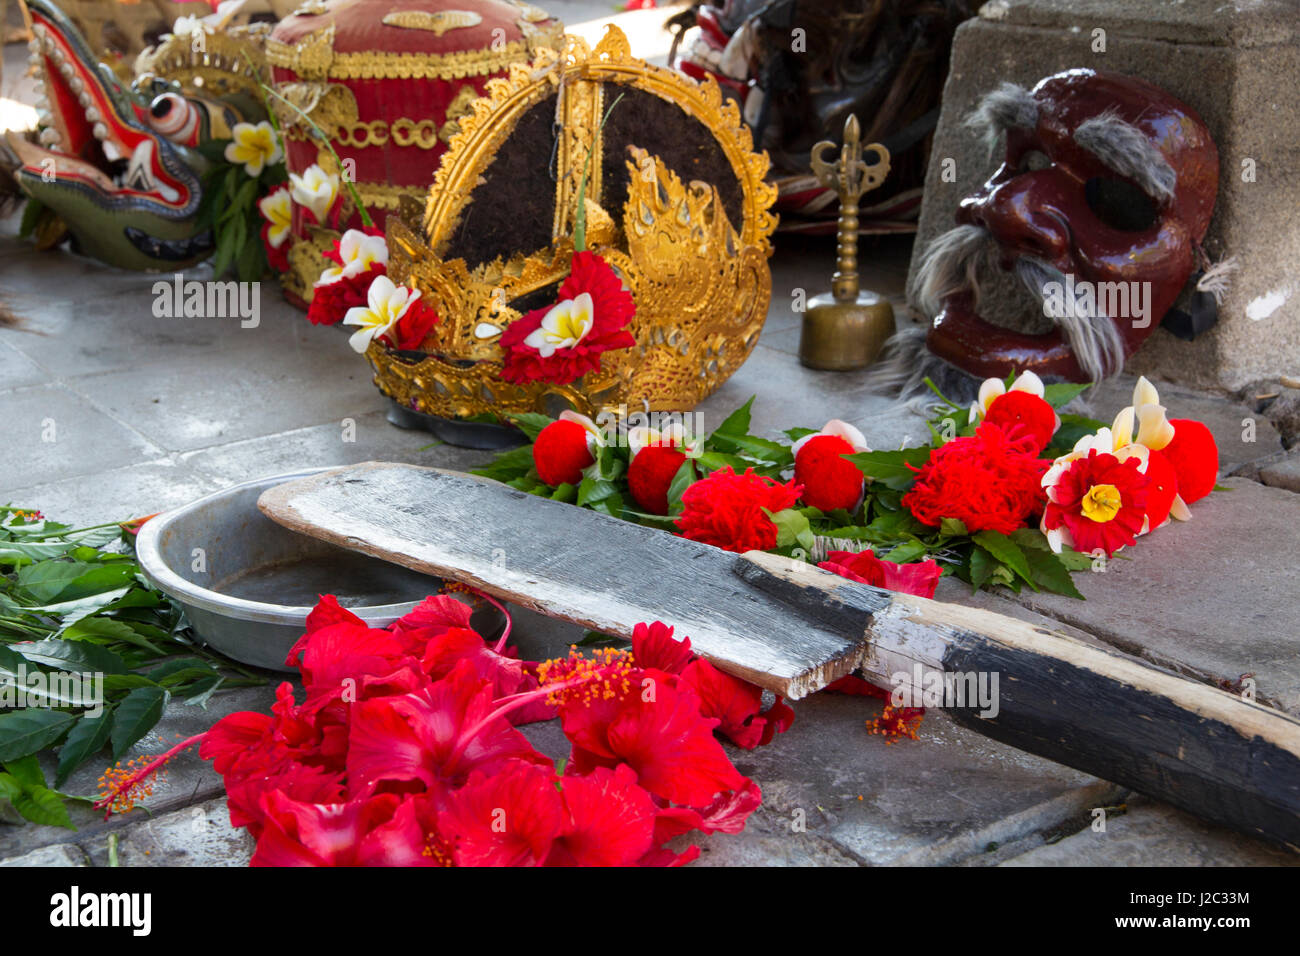 Indonesia, Bali. Balinese Legong and Barong ceremonial headdresses decorated with red Hibiscus and Frangipani flowers in Bali, Indonesia. Stock Photo